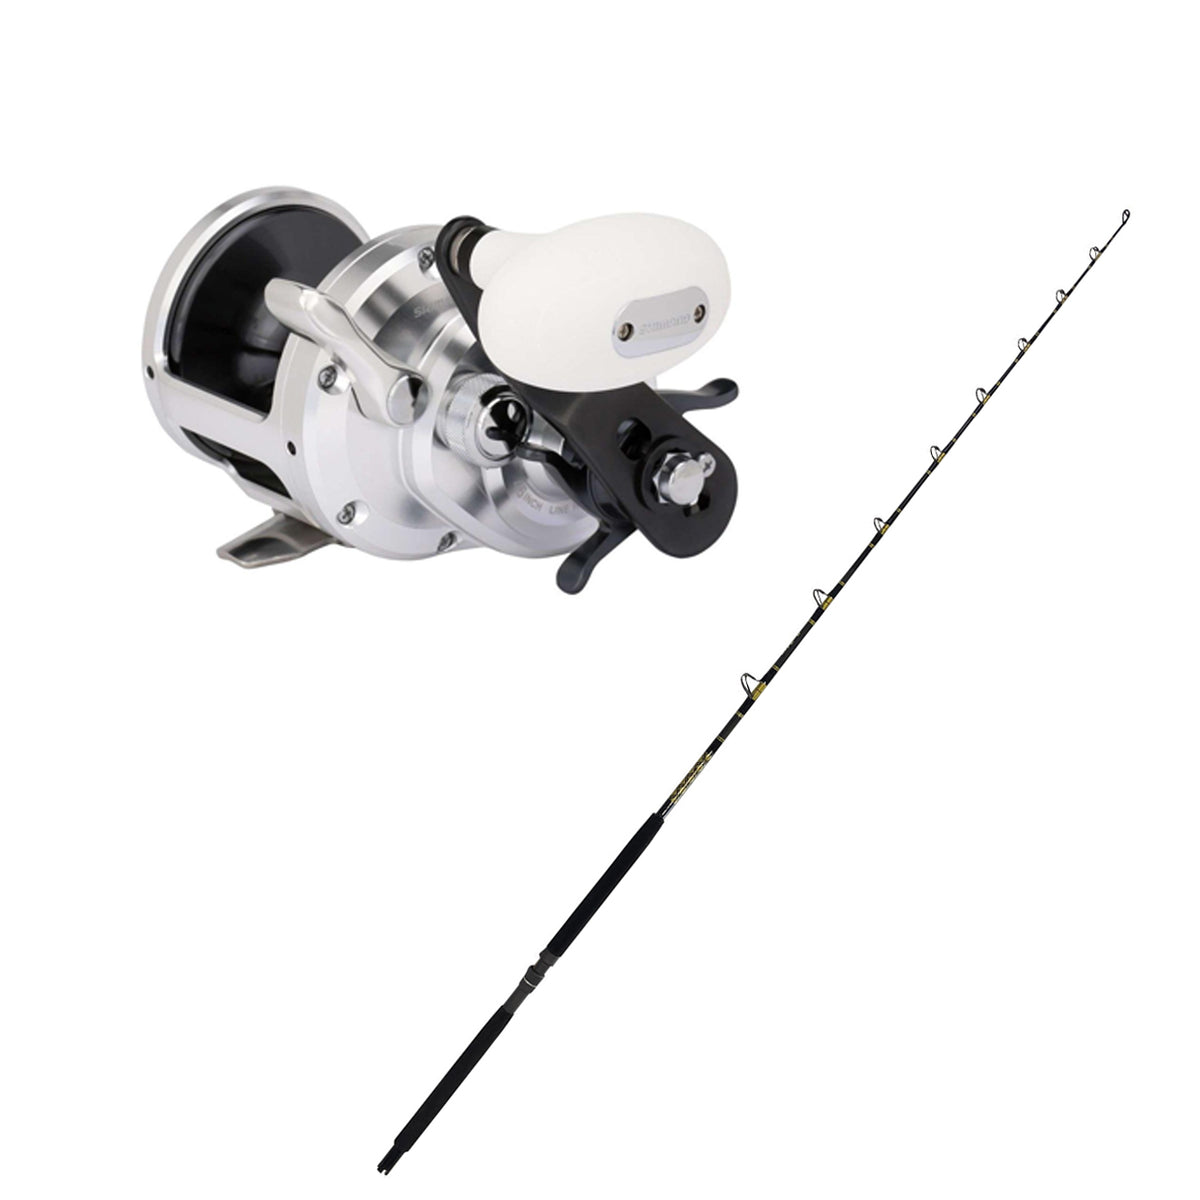 Shimano TRINIDAD 20A TROLLING REEL with KC 15-30 6&#39;6&quot; Composite CHAOS Gold Combo